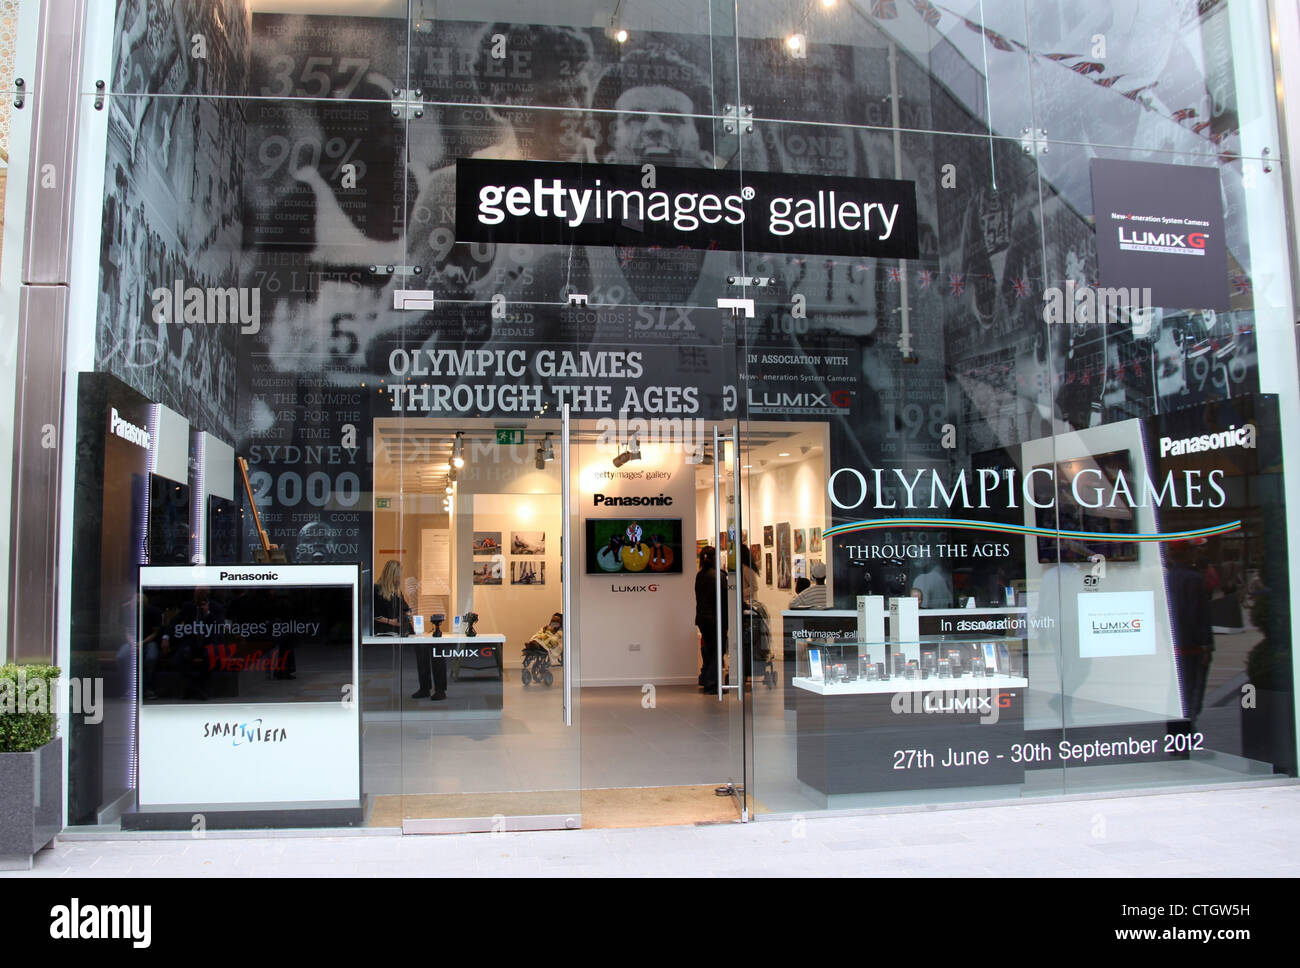 Getty Images Gallery at Westfield Stratford City à Londres Banque D'Images